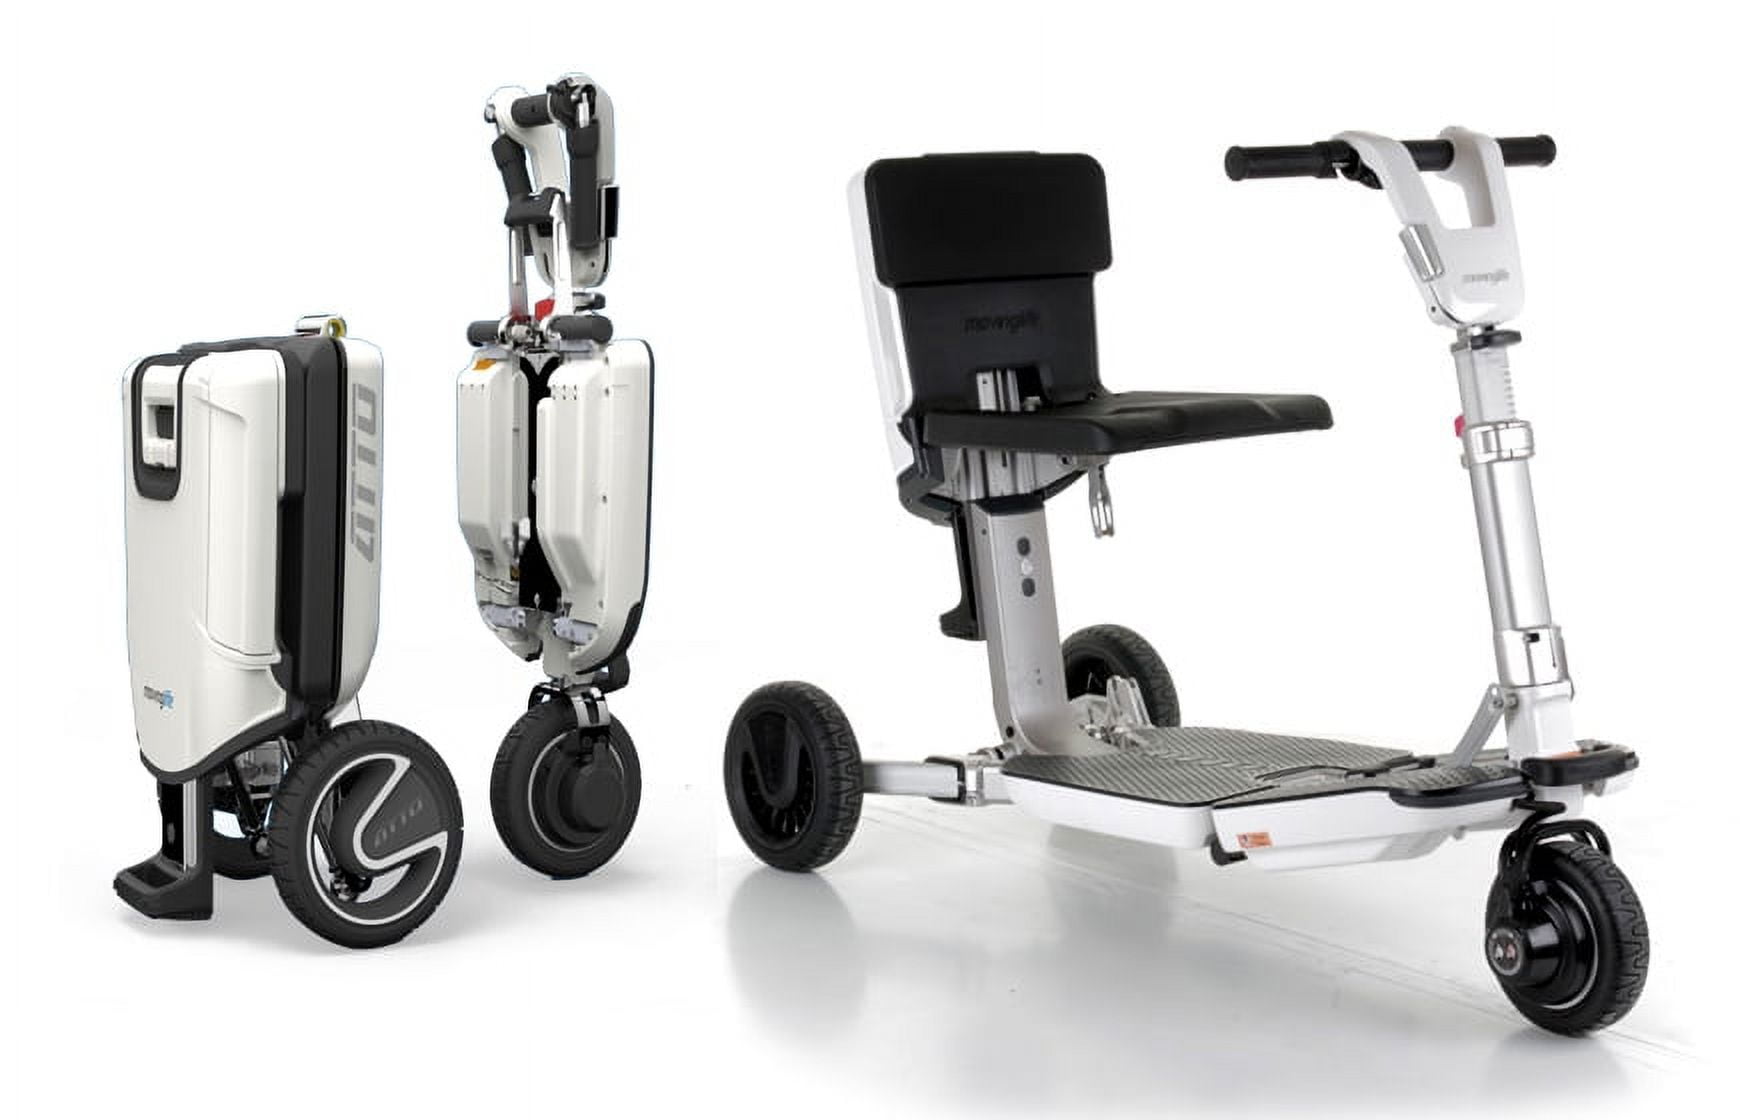 ATTO Deluxe FOLDING Lightweight Mobility Scooter New Moving